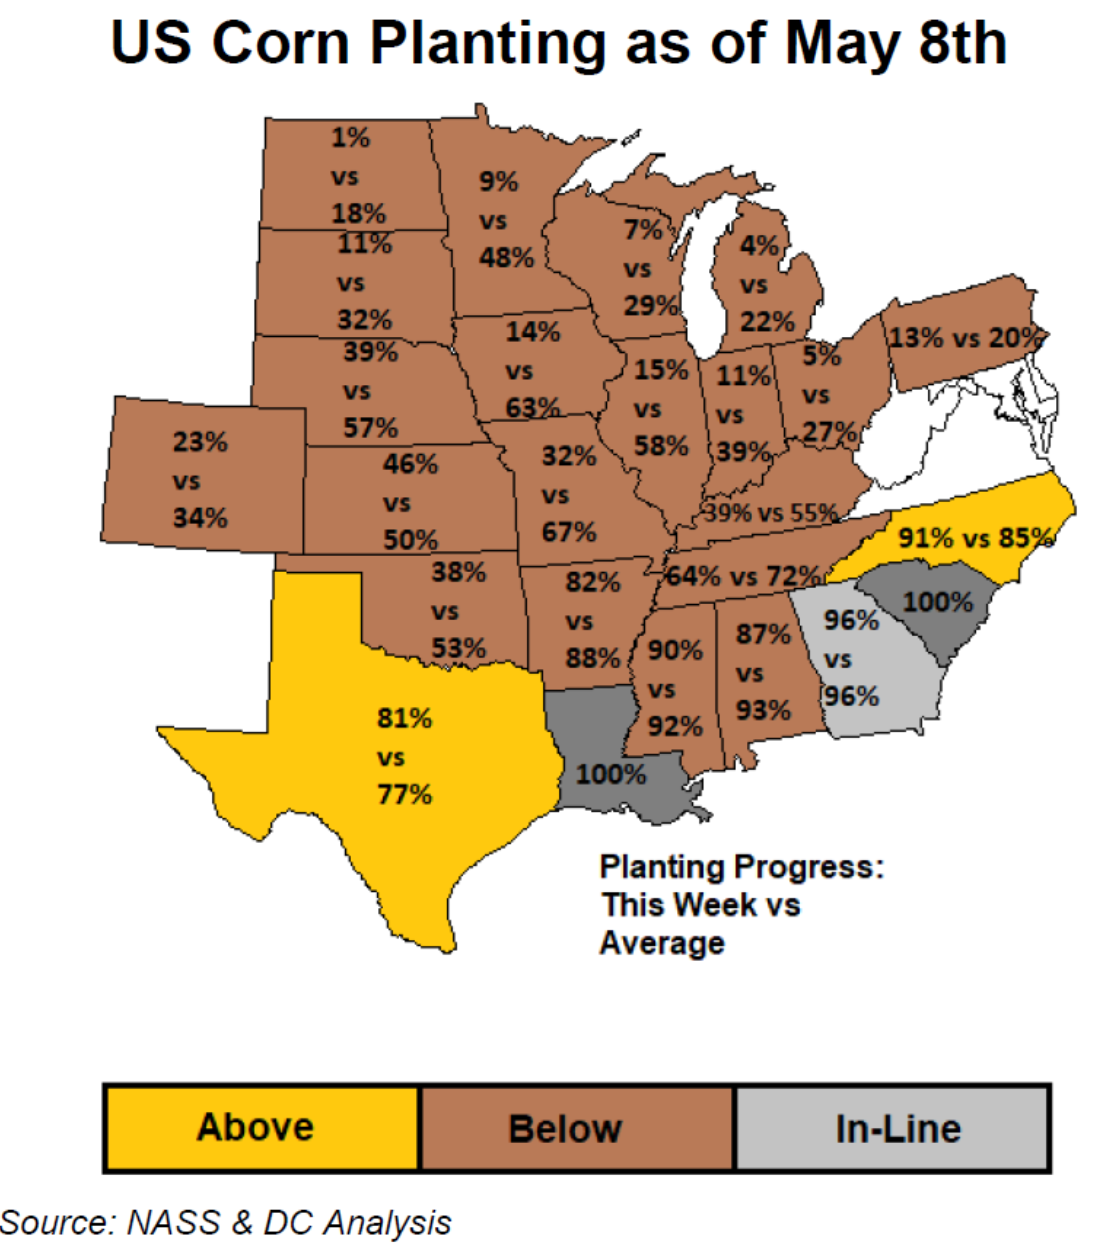 US Corn planting as of May 8th map.